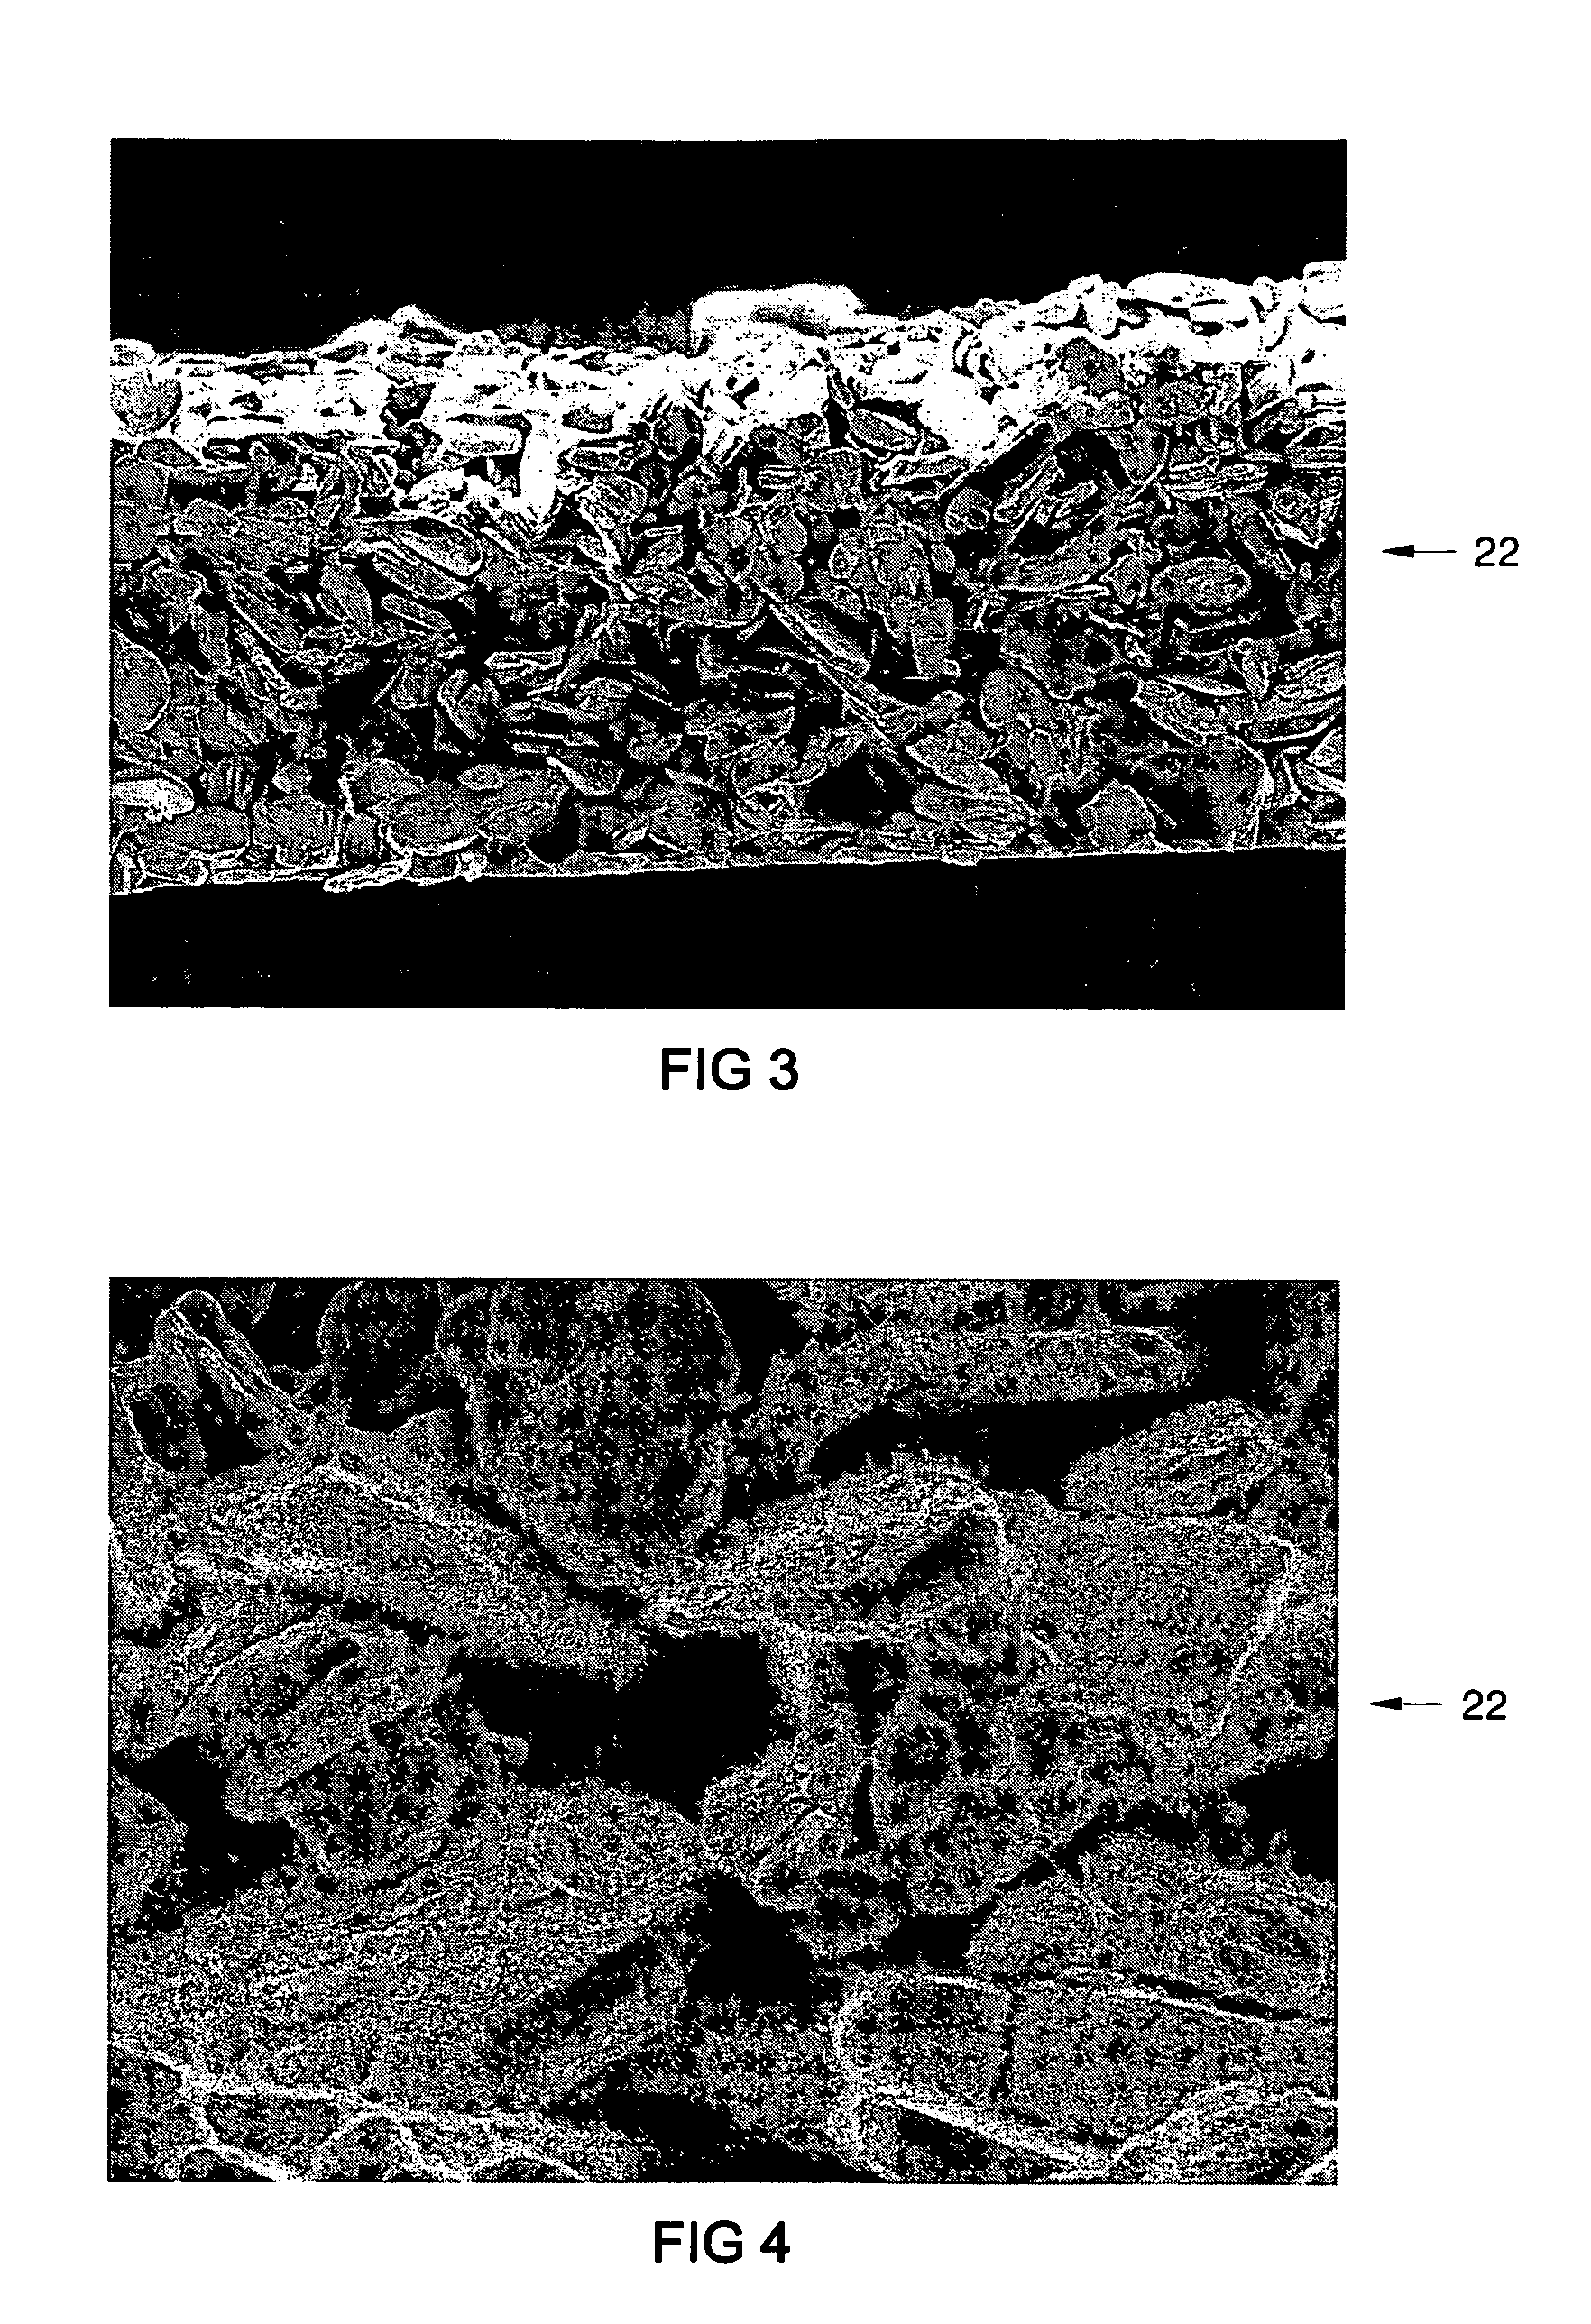 Particle-in-binder X-ray sensitive coating using polyimide binder